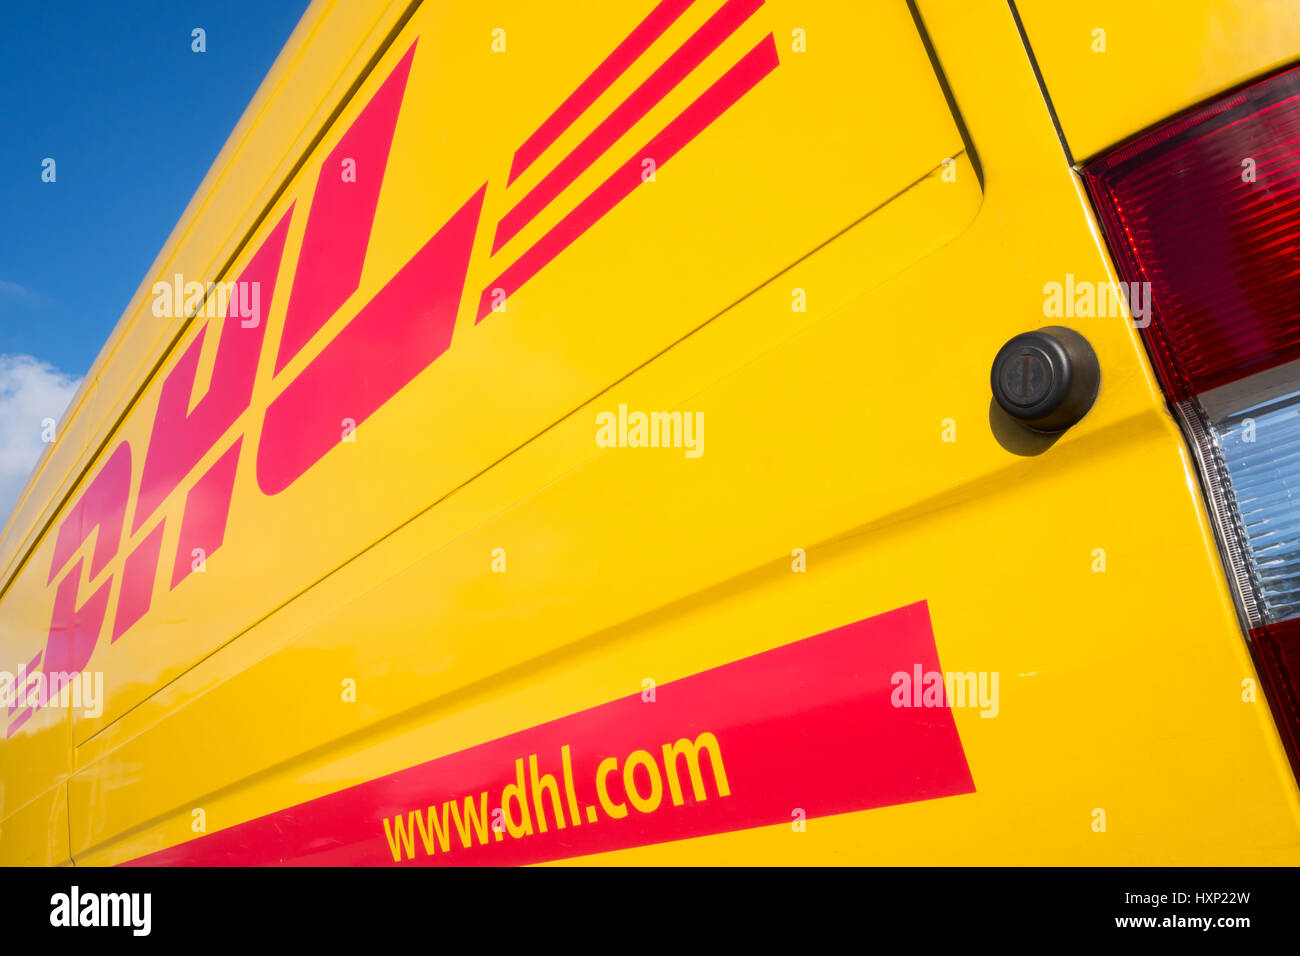 Side panel of a DHL delivery van. DHL is a division of the German logistics company Deutsche Post AG providing international express mail services. Stock Photo